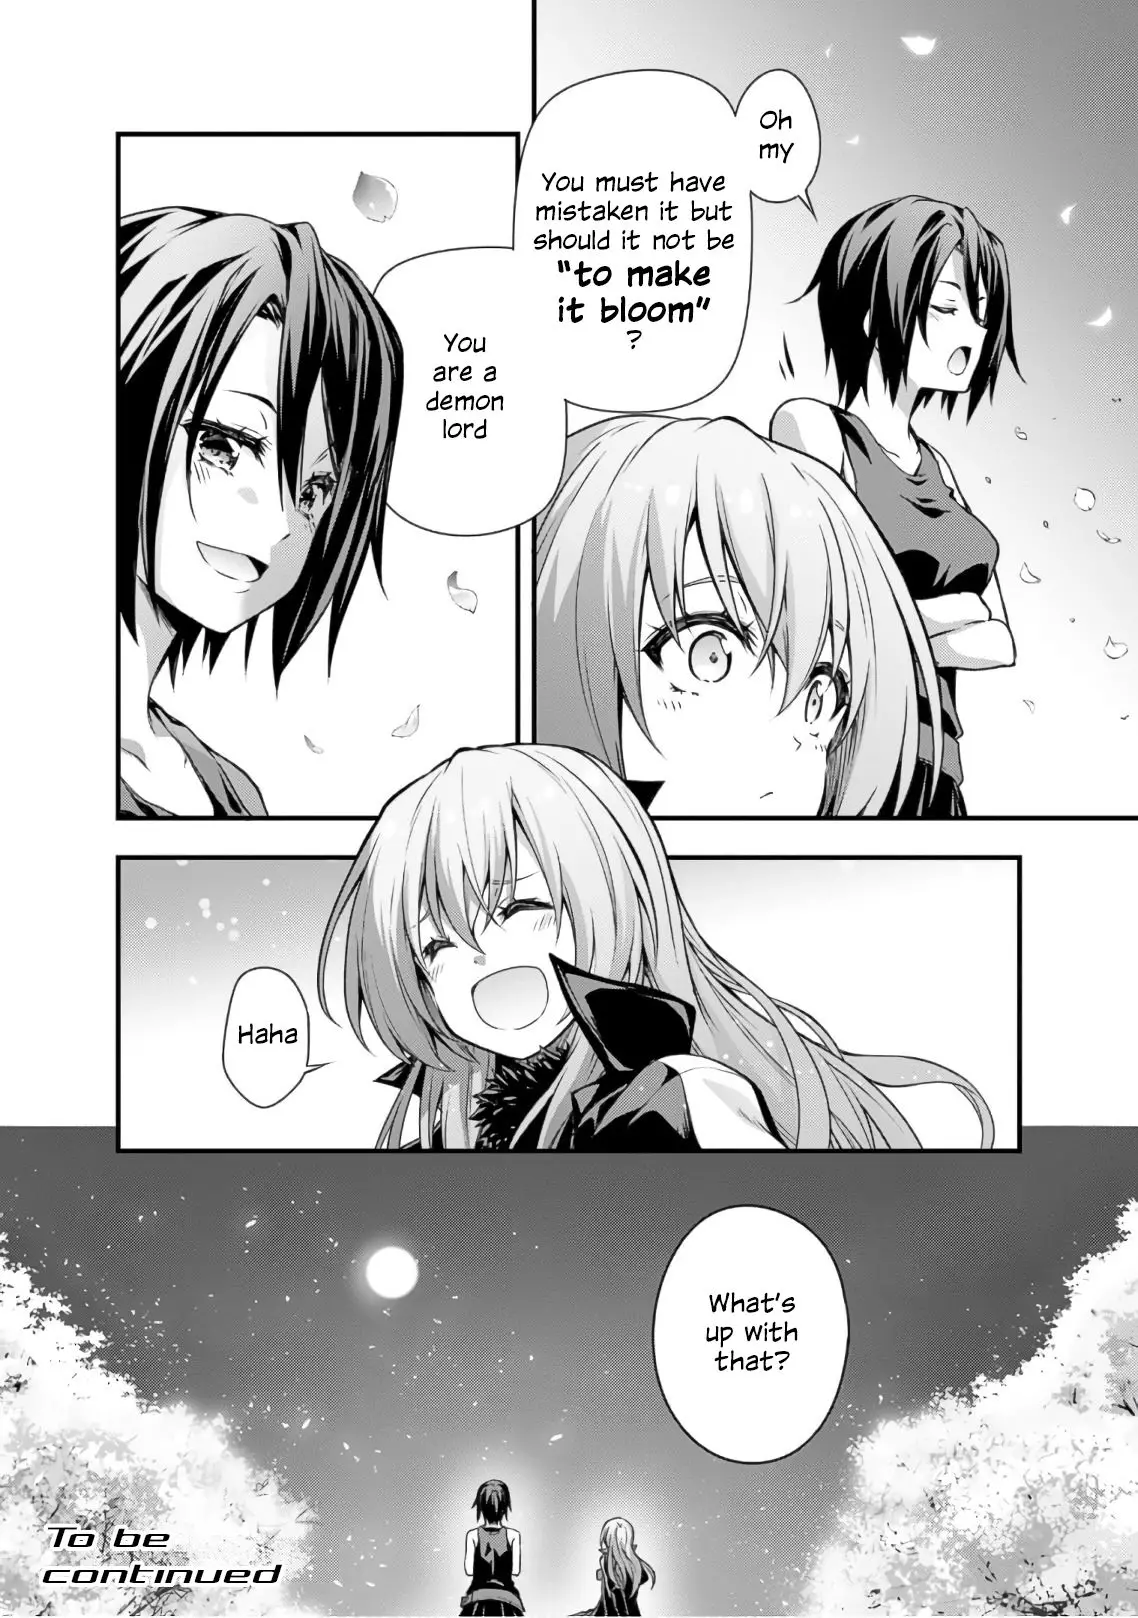 Tensei Shitara Slime Datta Ken: The Ways of Strolling in the Demon Country - 22 page 028